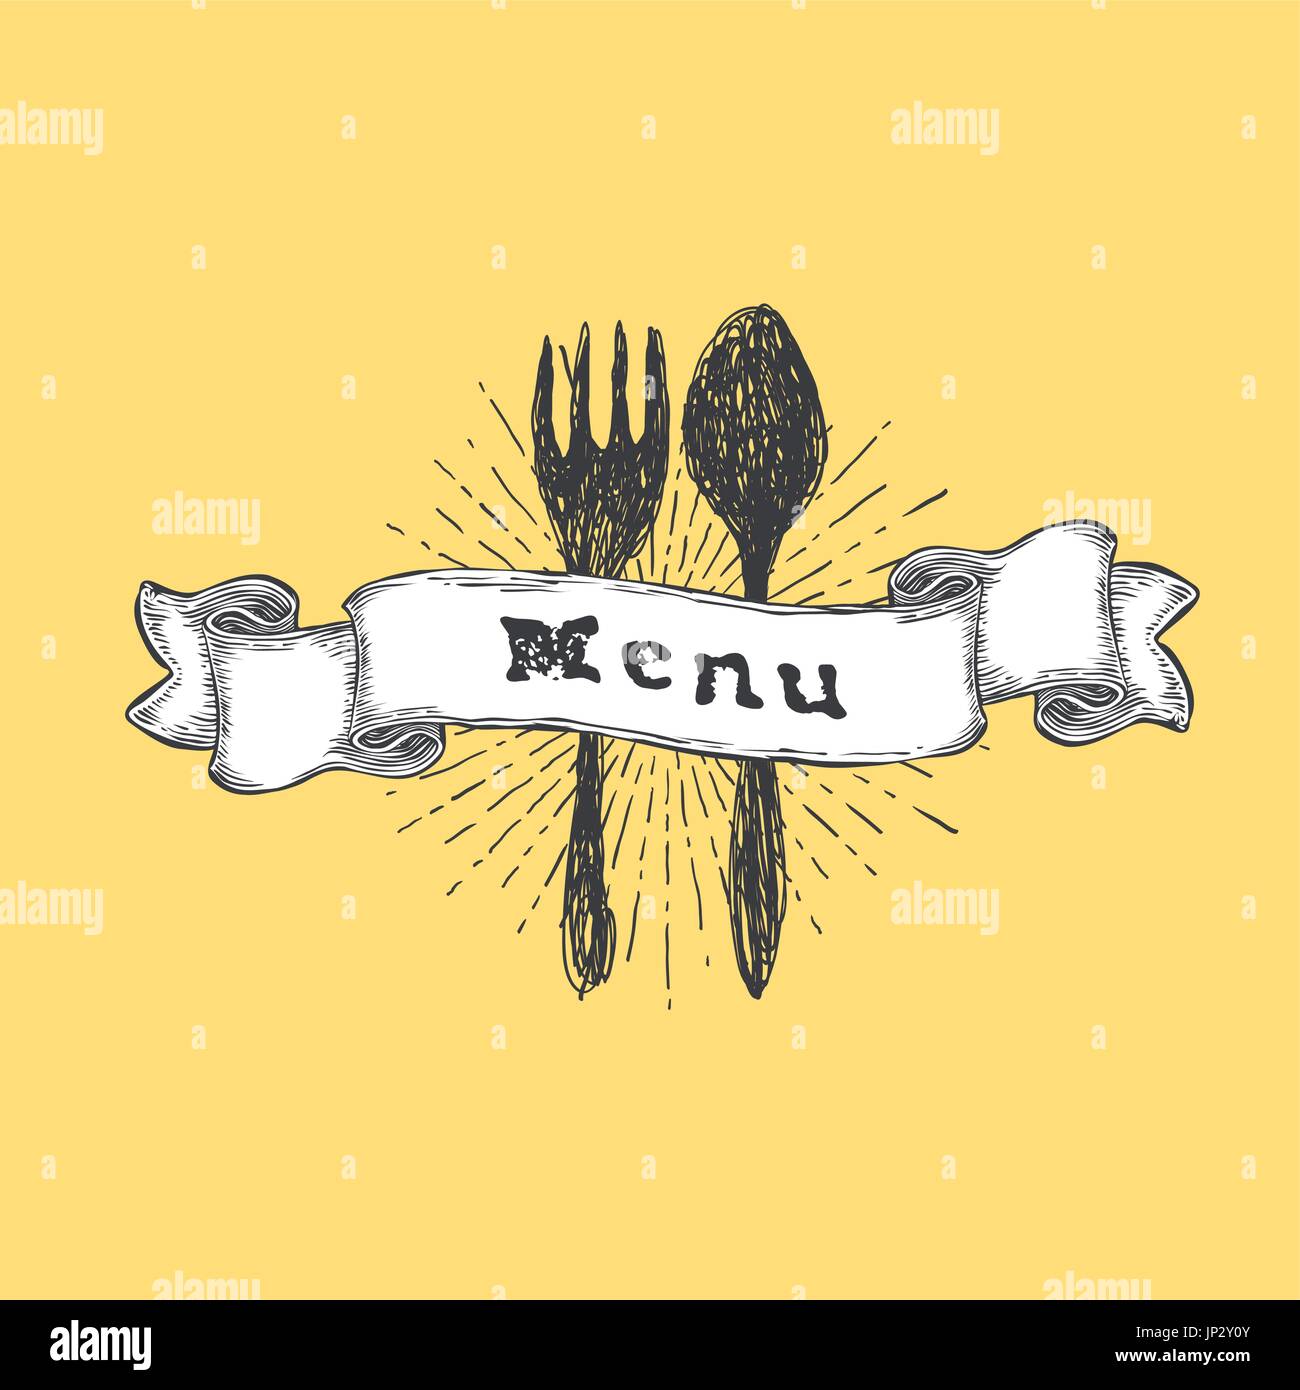 Fork and spoon. Restaurant menu template. Vintage hand-drawn text on ribbon. Stock Vector